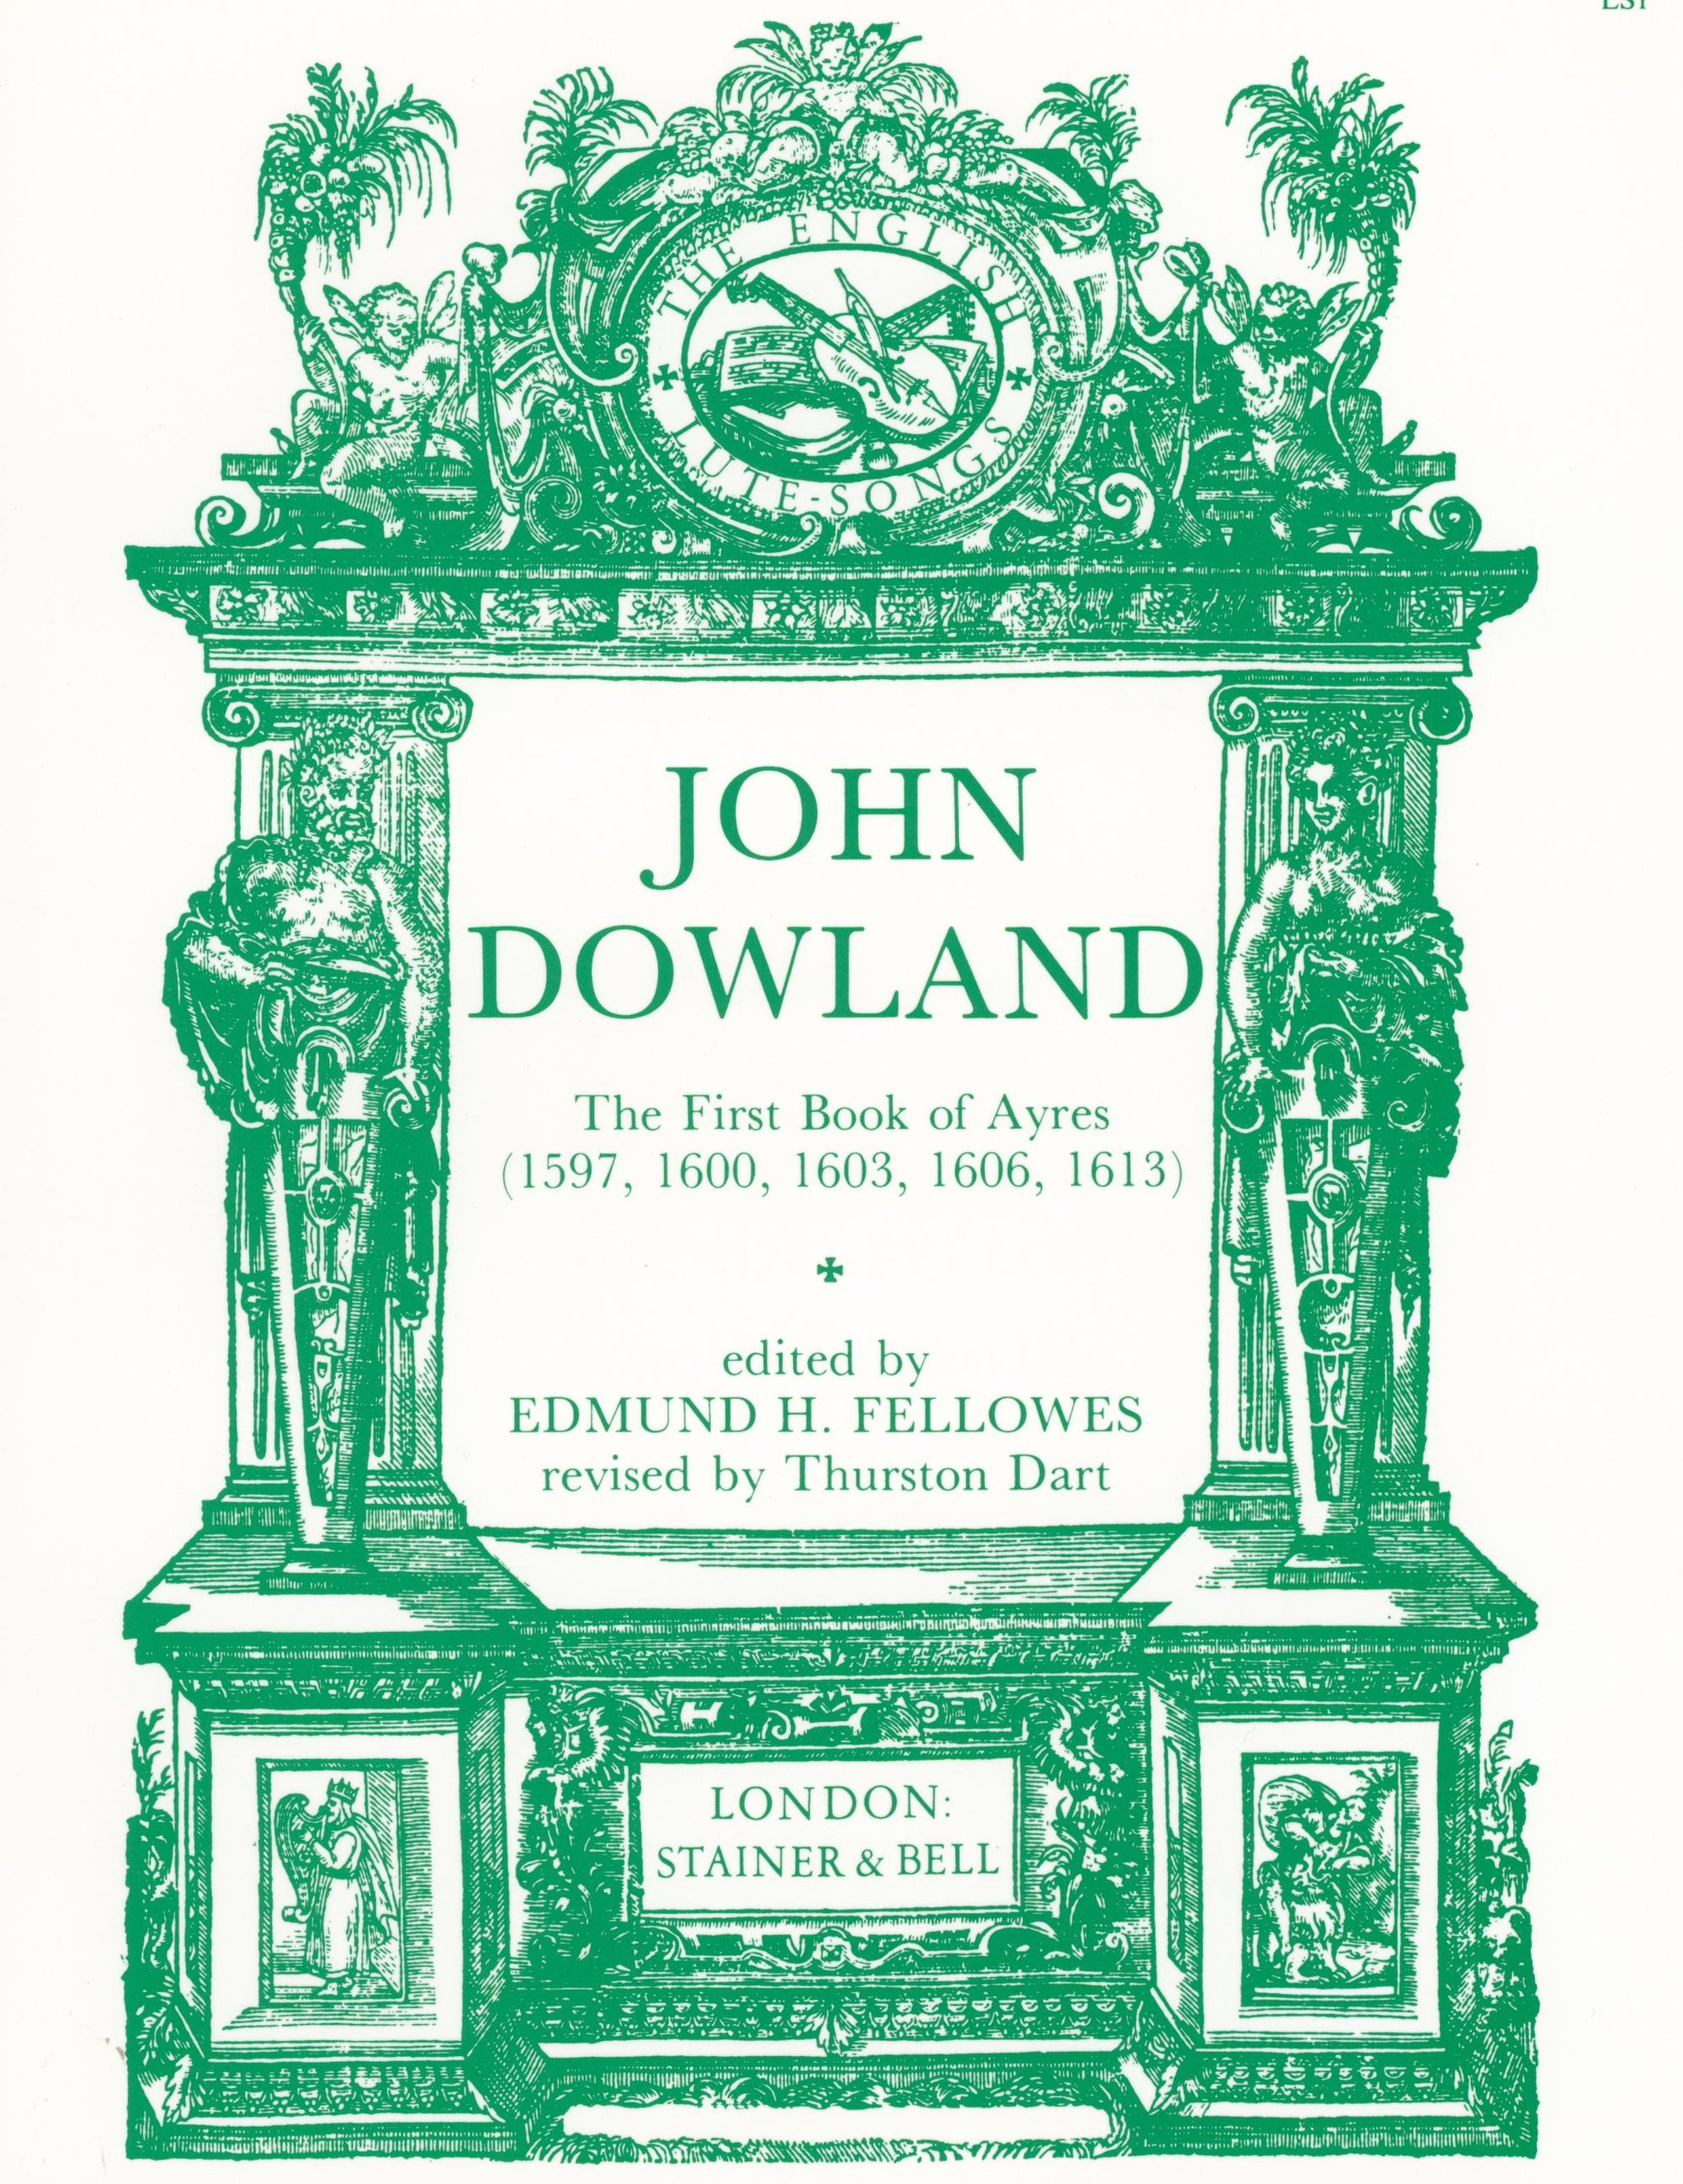 Dowland: The First Book of Ayres (1597, 1600, 1603, 1606, 1613)